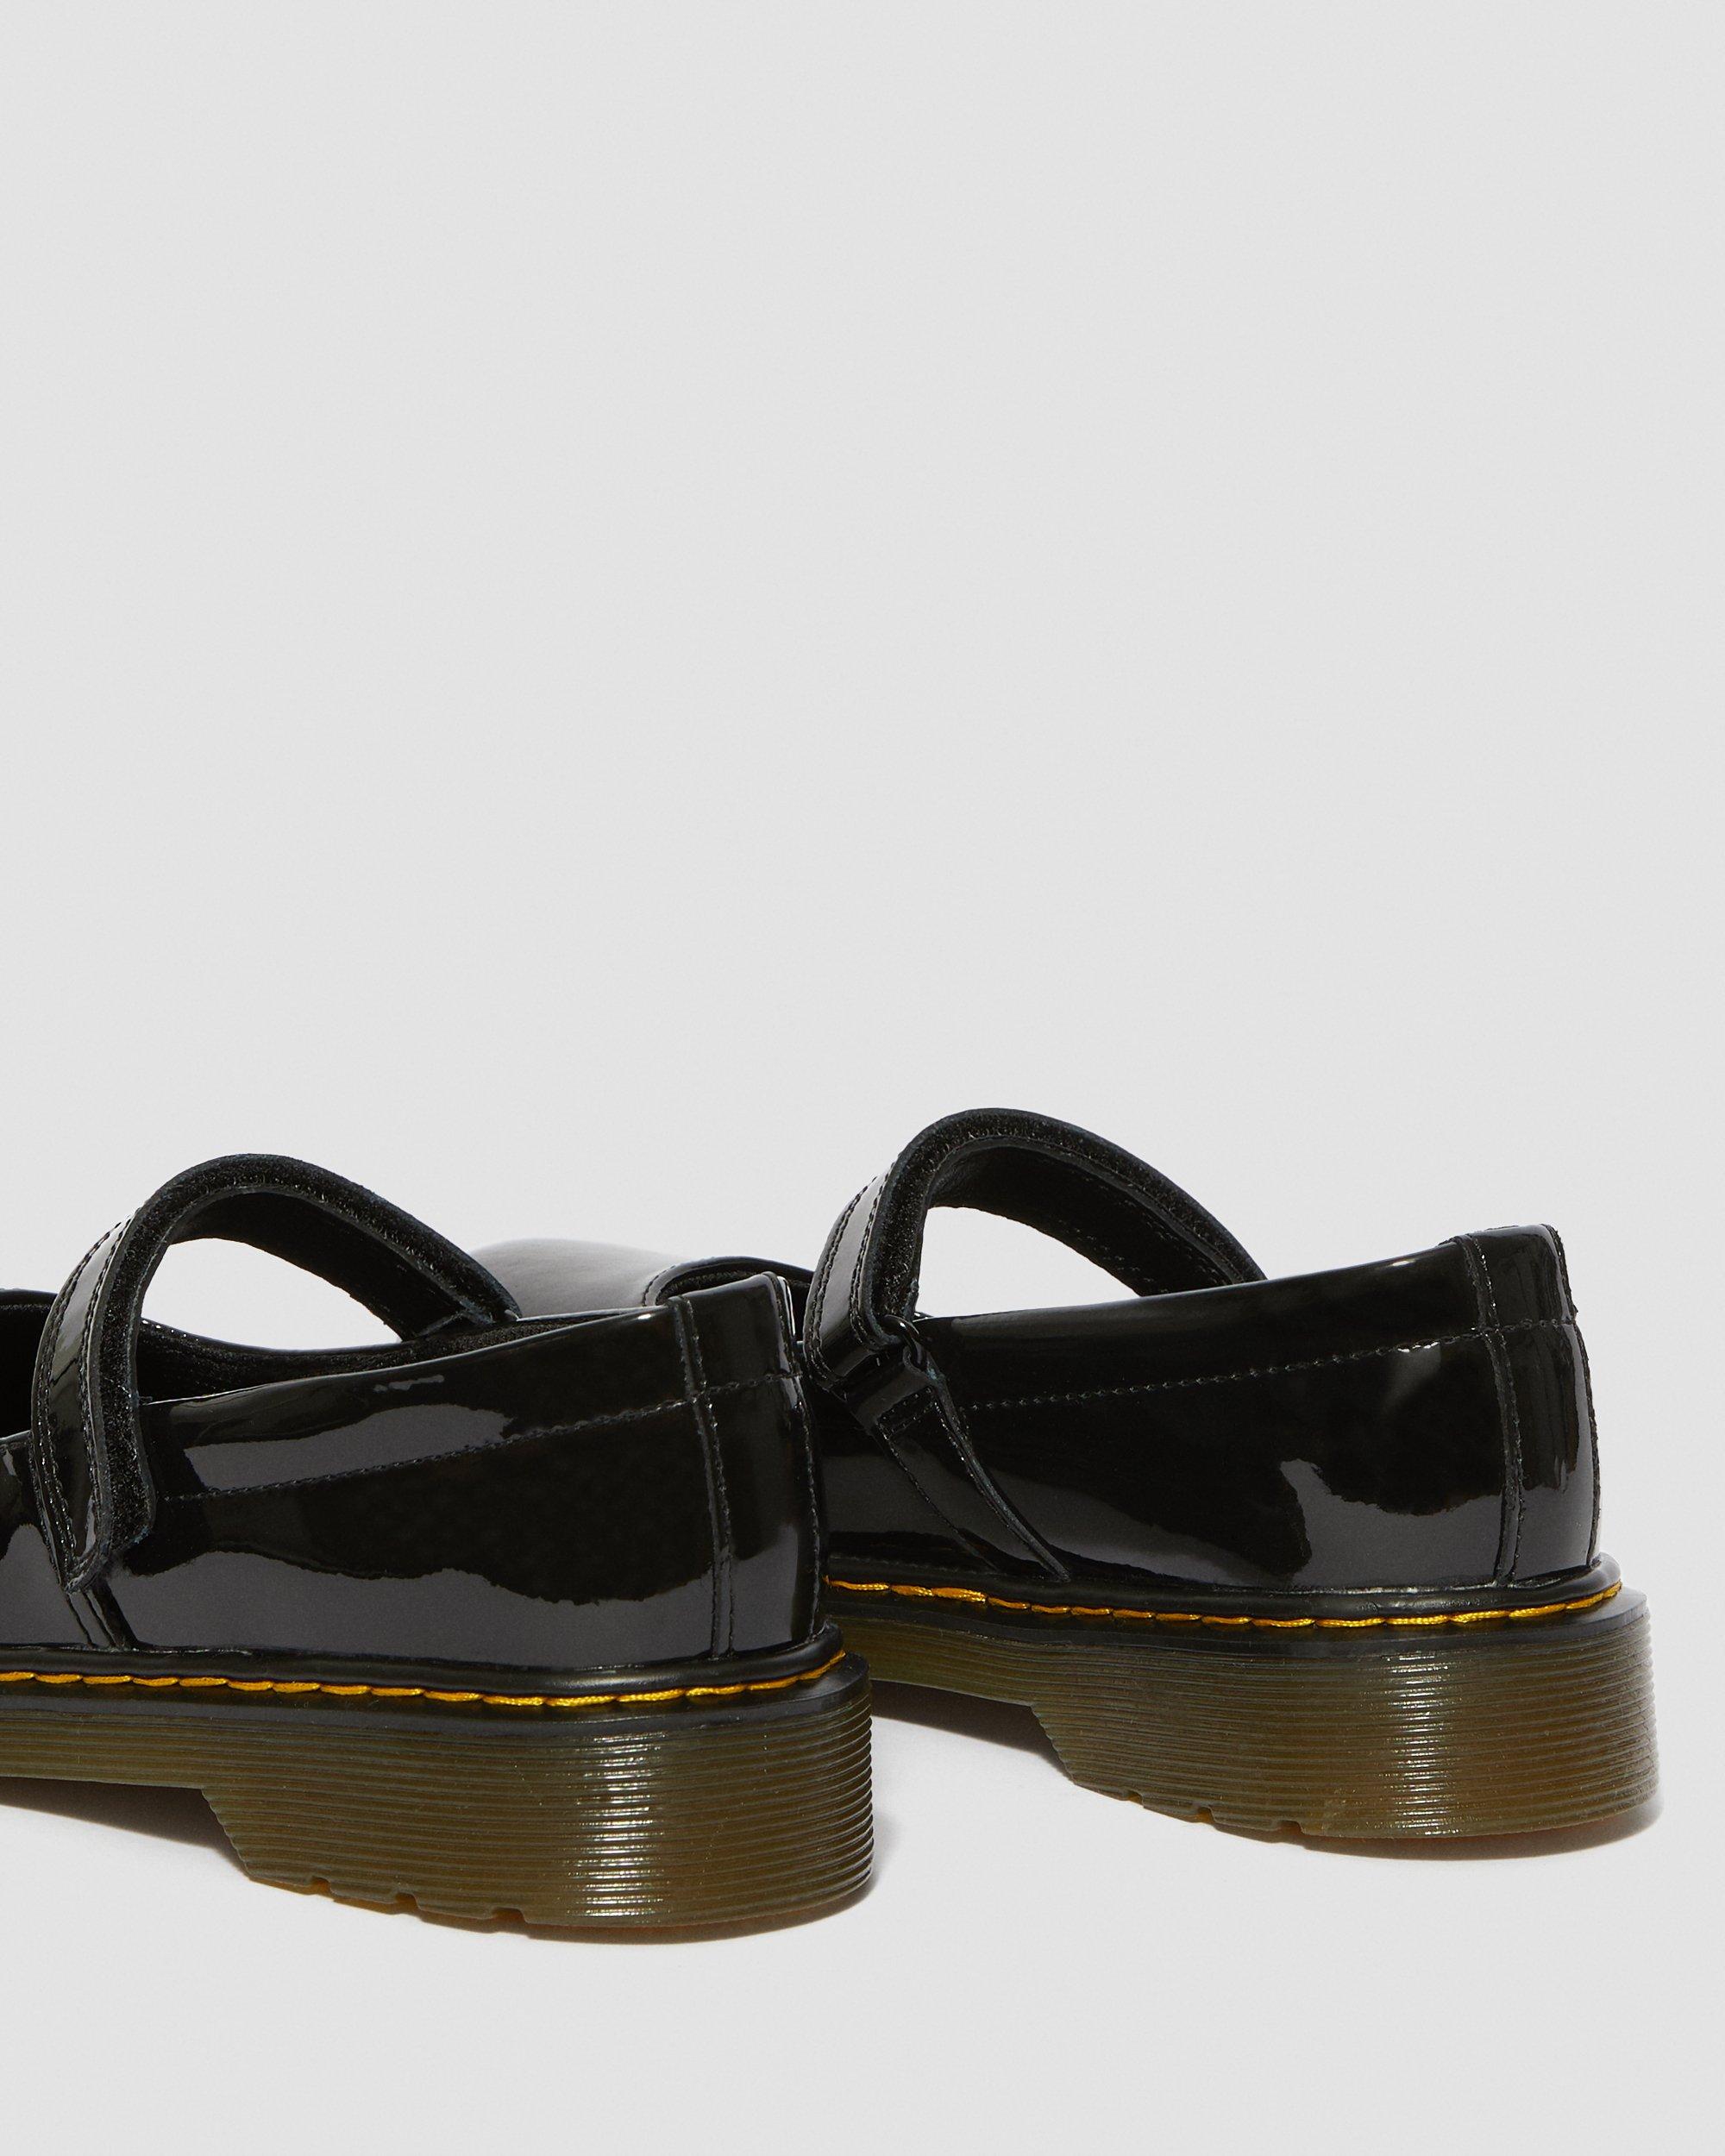 YOUTH MACCY PATENT SHOES in Black